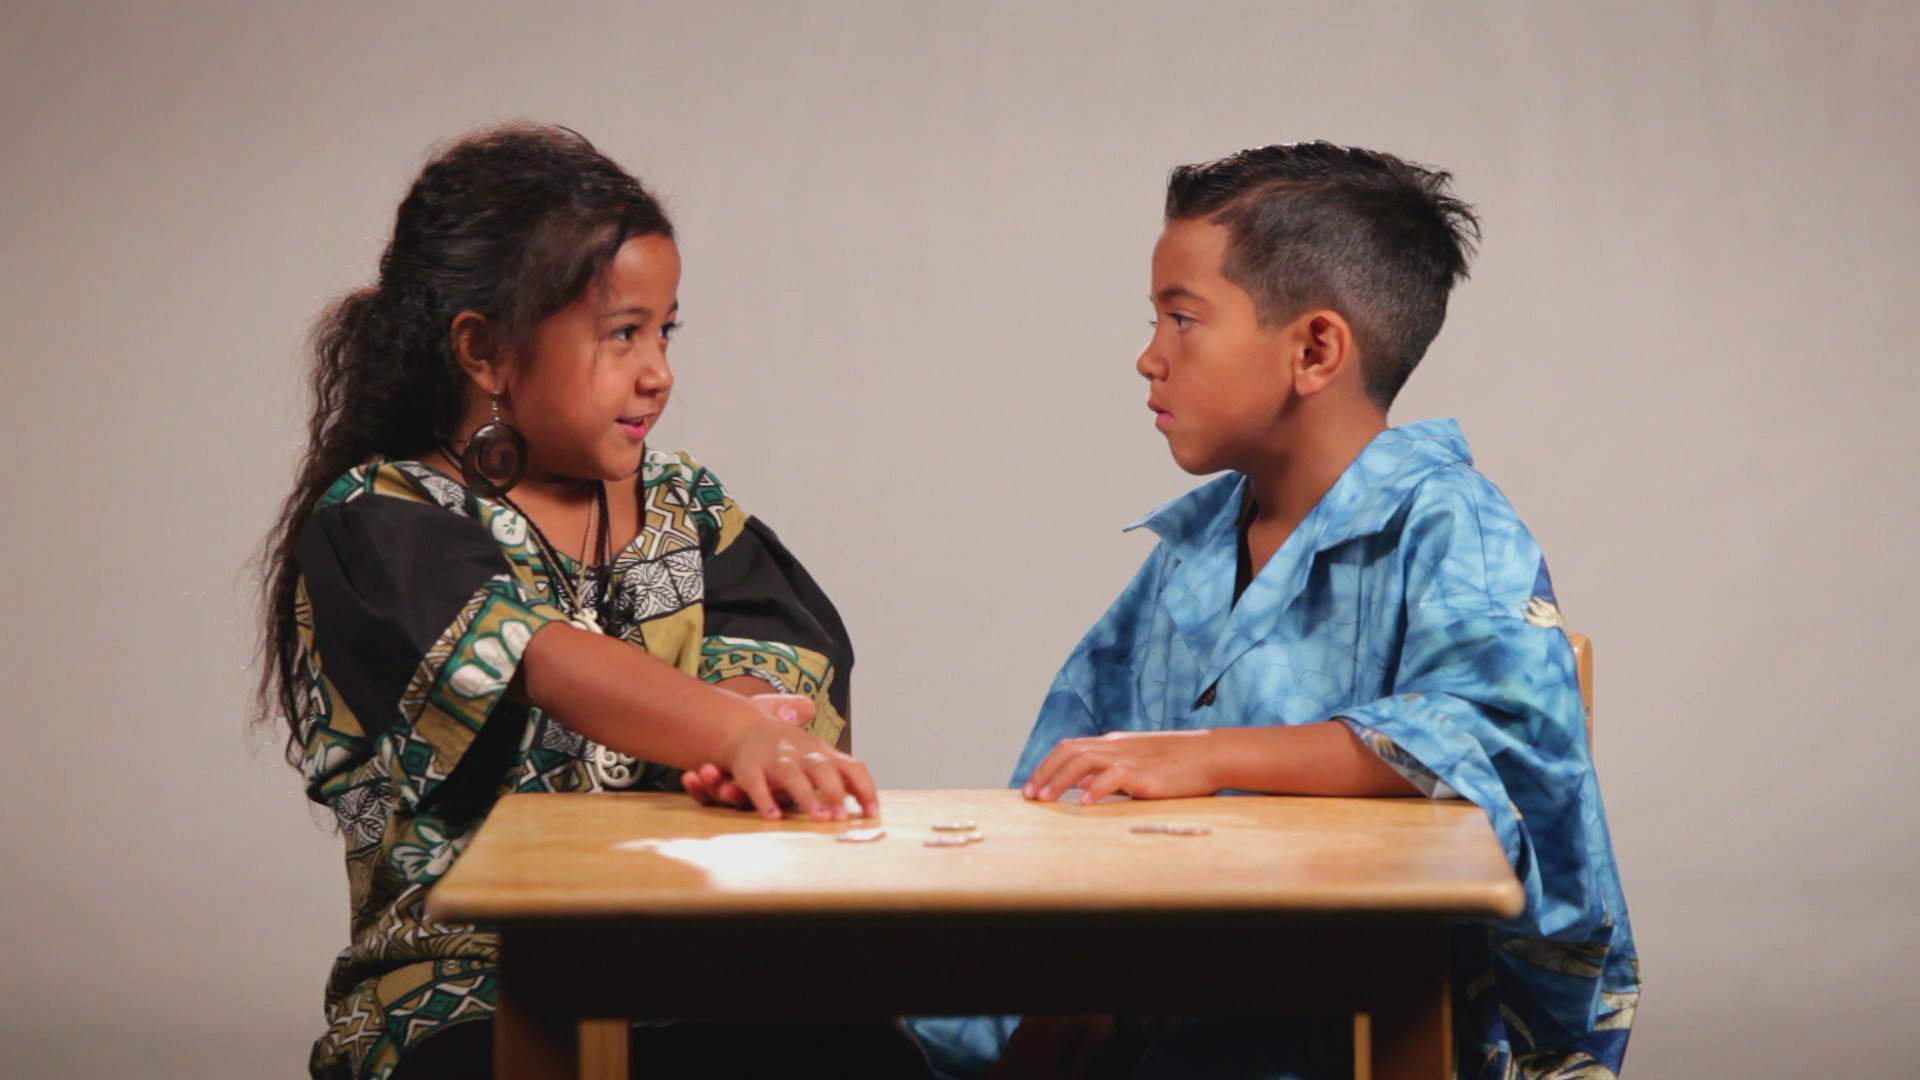 A photo of a young girl and young boy sitting at a desk, looking at each other while talking.